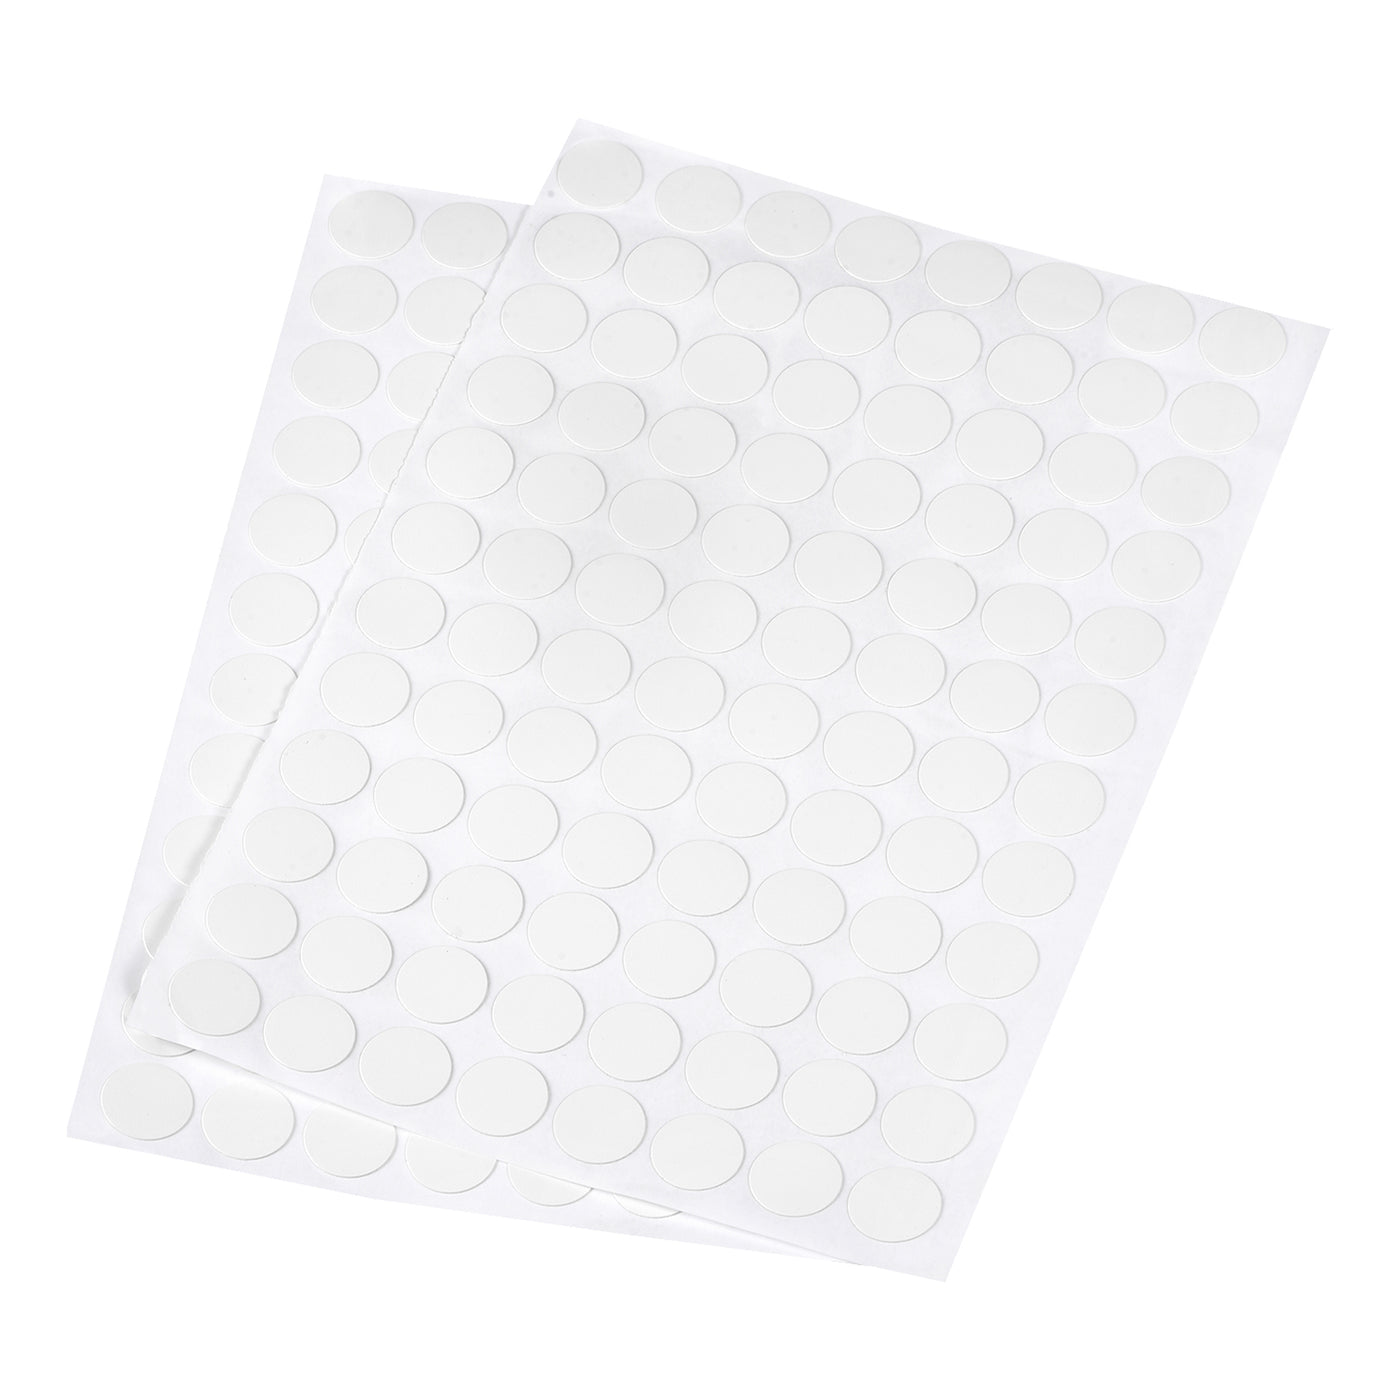 uxcell Uxcell Screw Hole Cover Stickers, 15mm Dia PVC Self Adhesive Covers Caps for Wood Furniture Cabinet Shelf Wardrobe, White 6 Sheet/576pcs